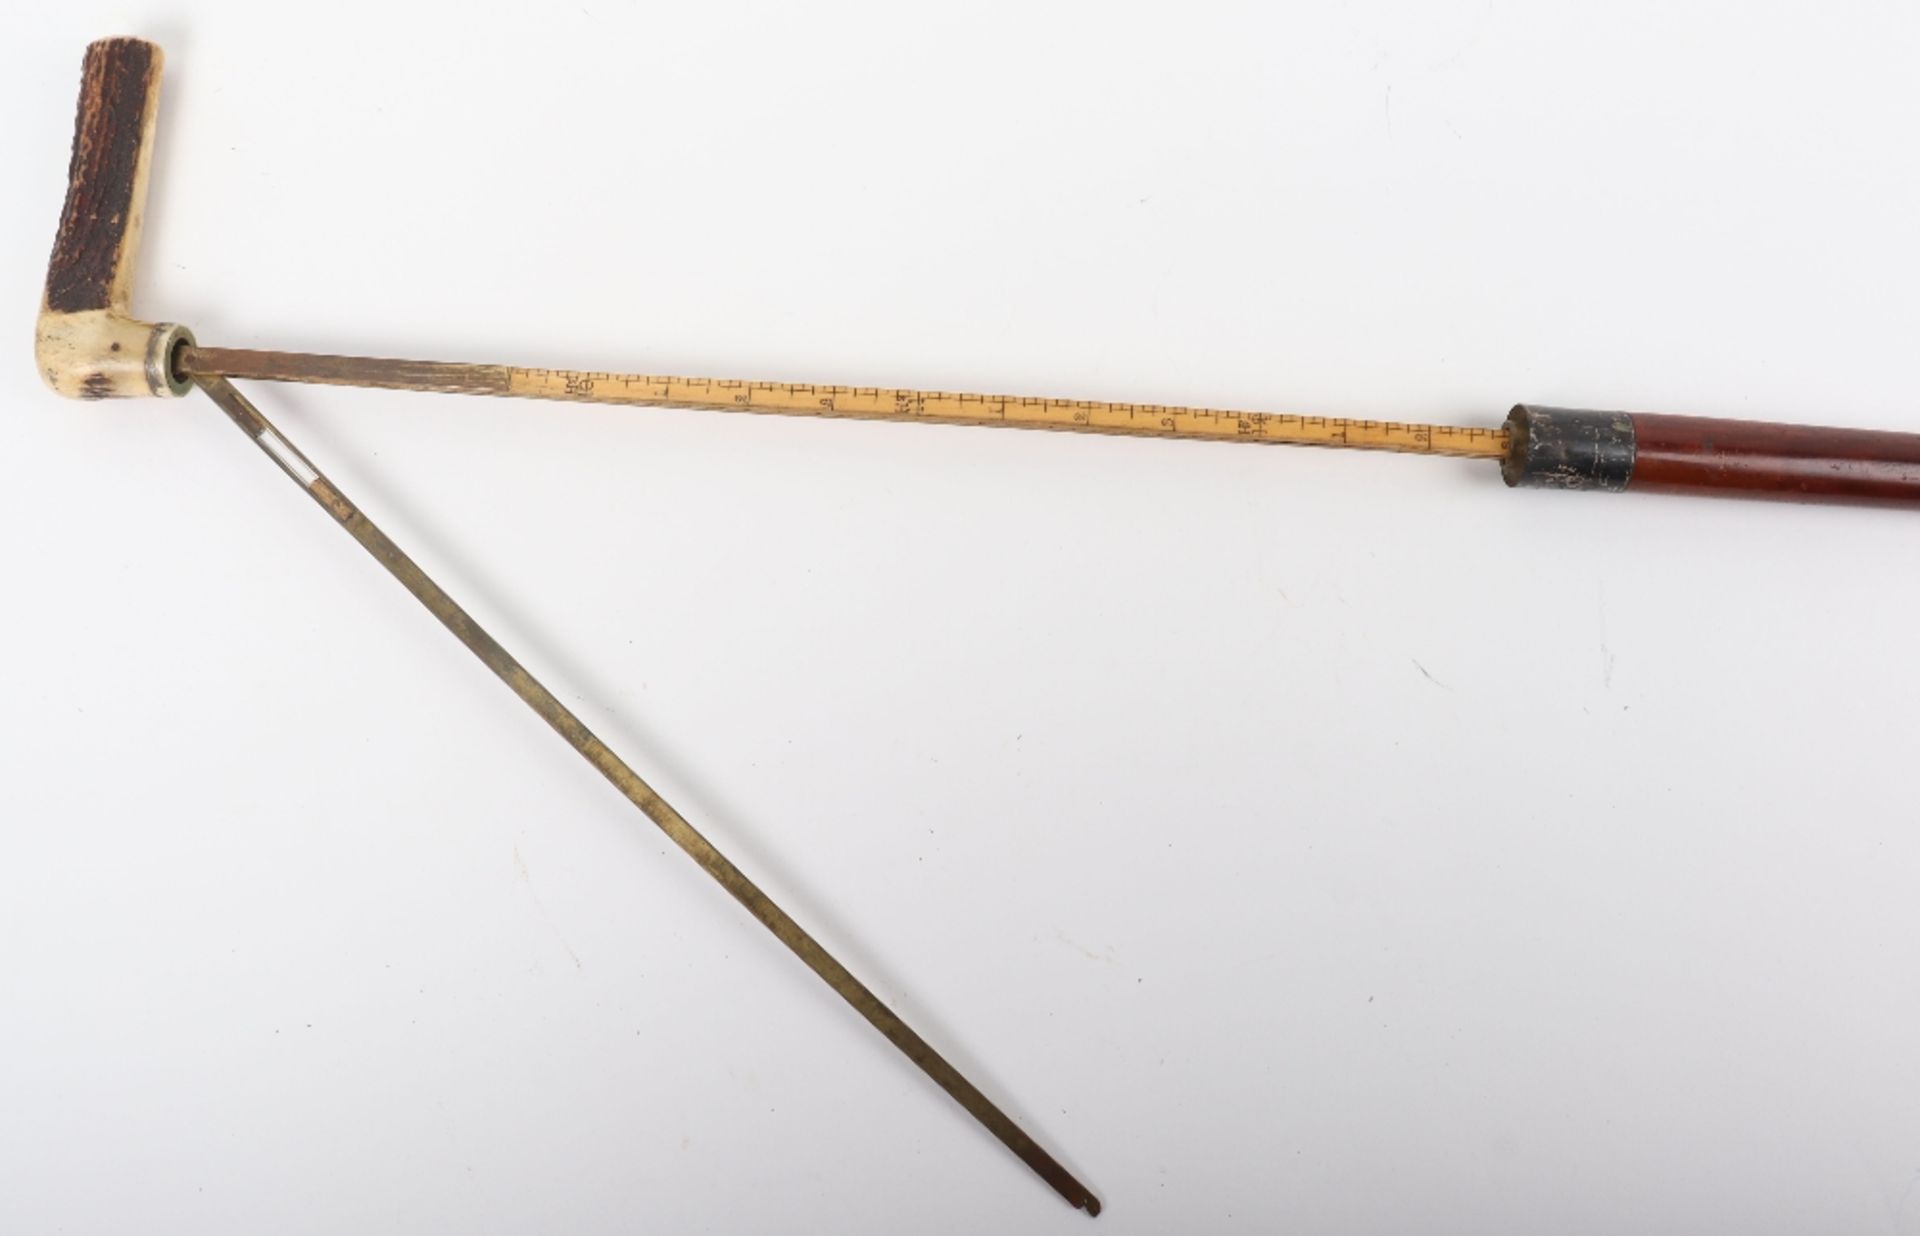 An Edwardian walking stick with spirit level (lacking liquid) and scaled ruler, with horn handle - Image 10 of 14